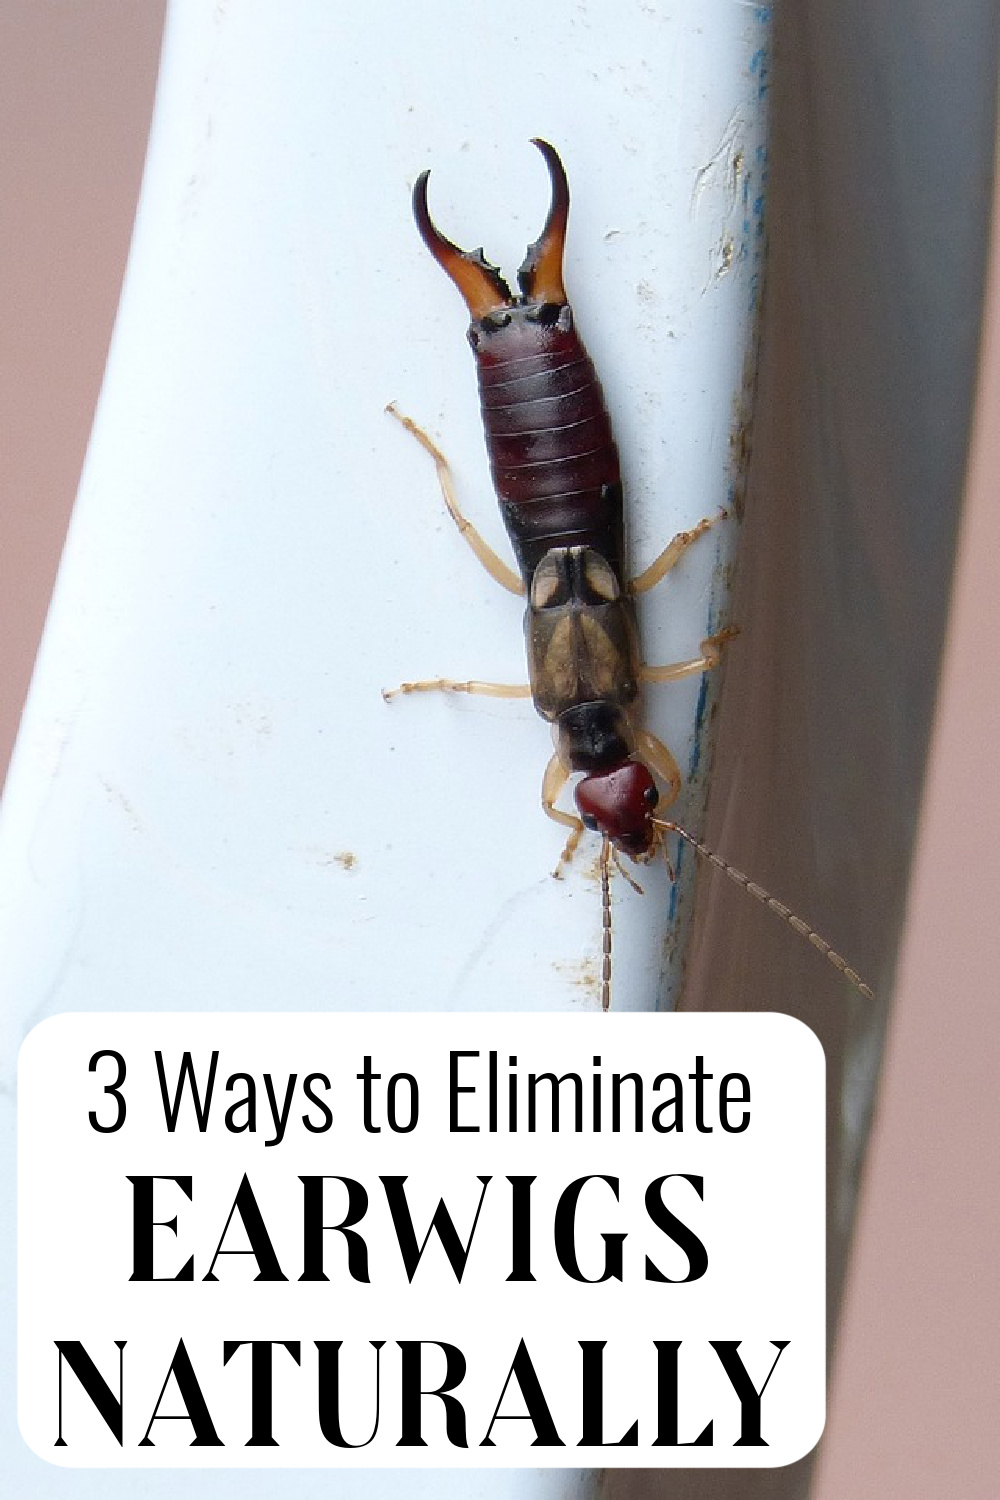 3 Ways to Eliminate Earwigs Naturally